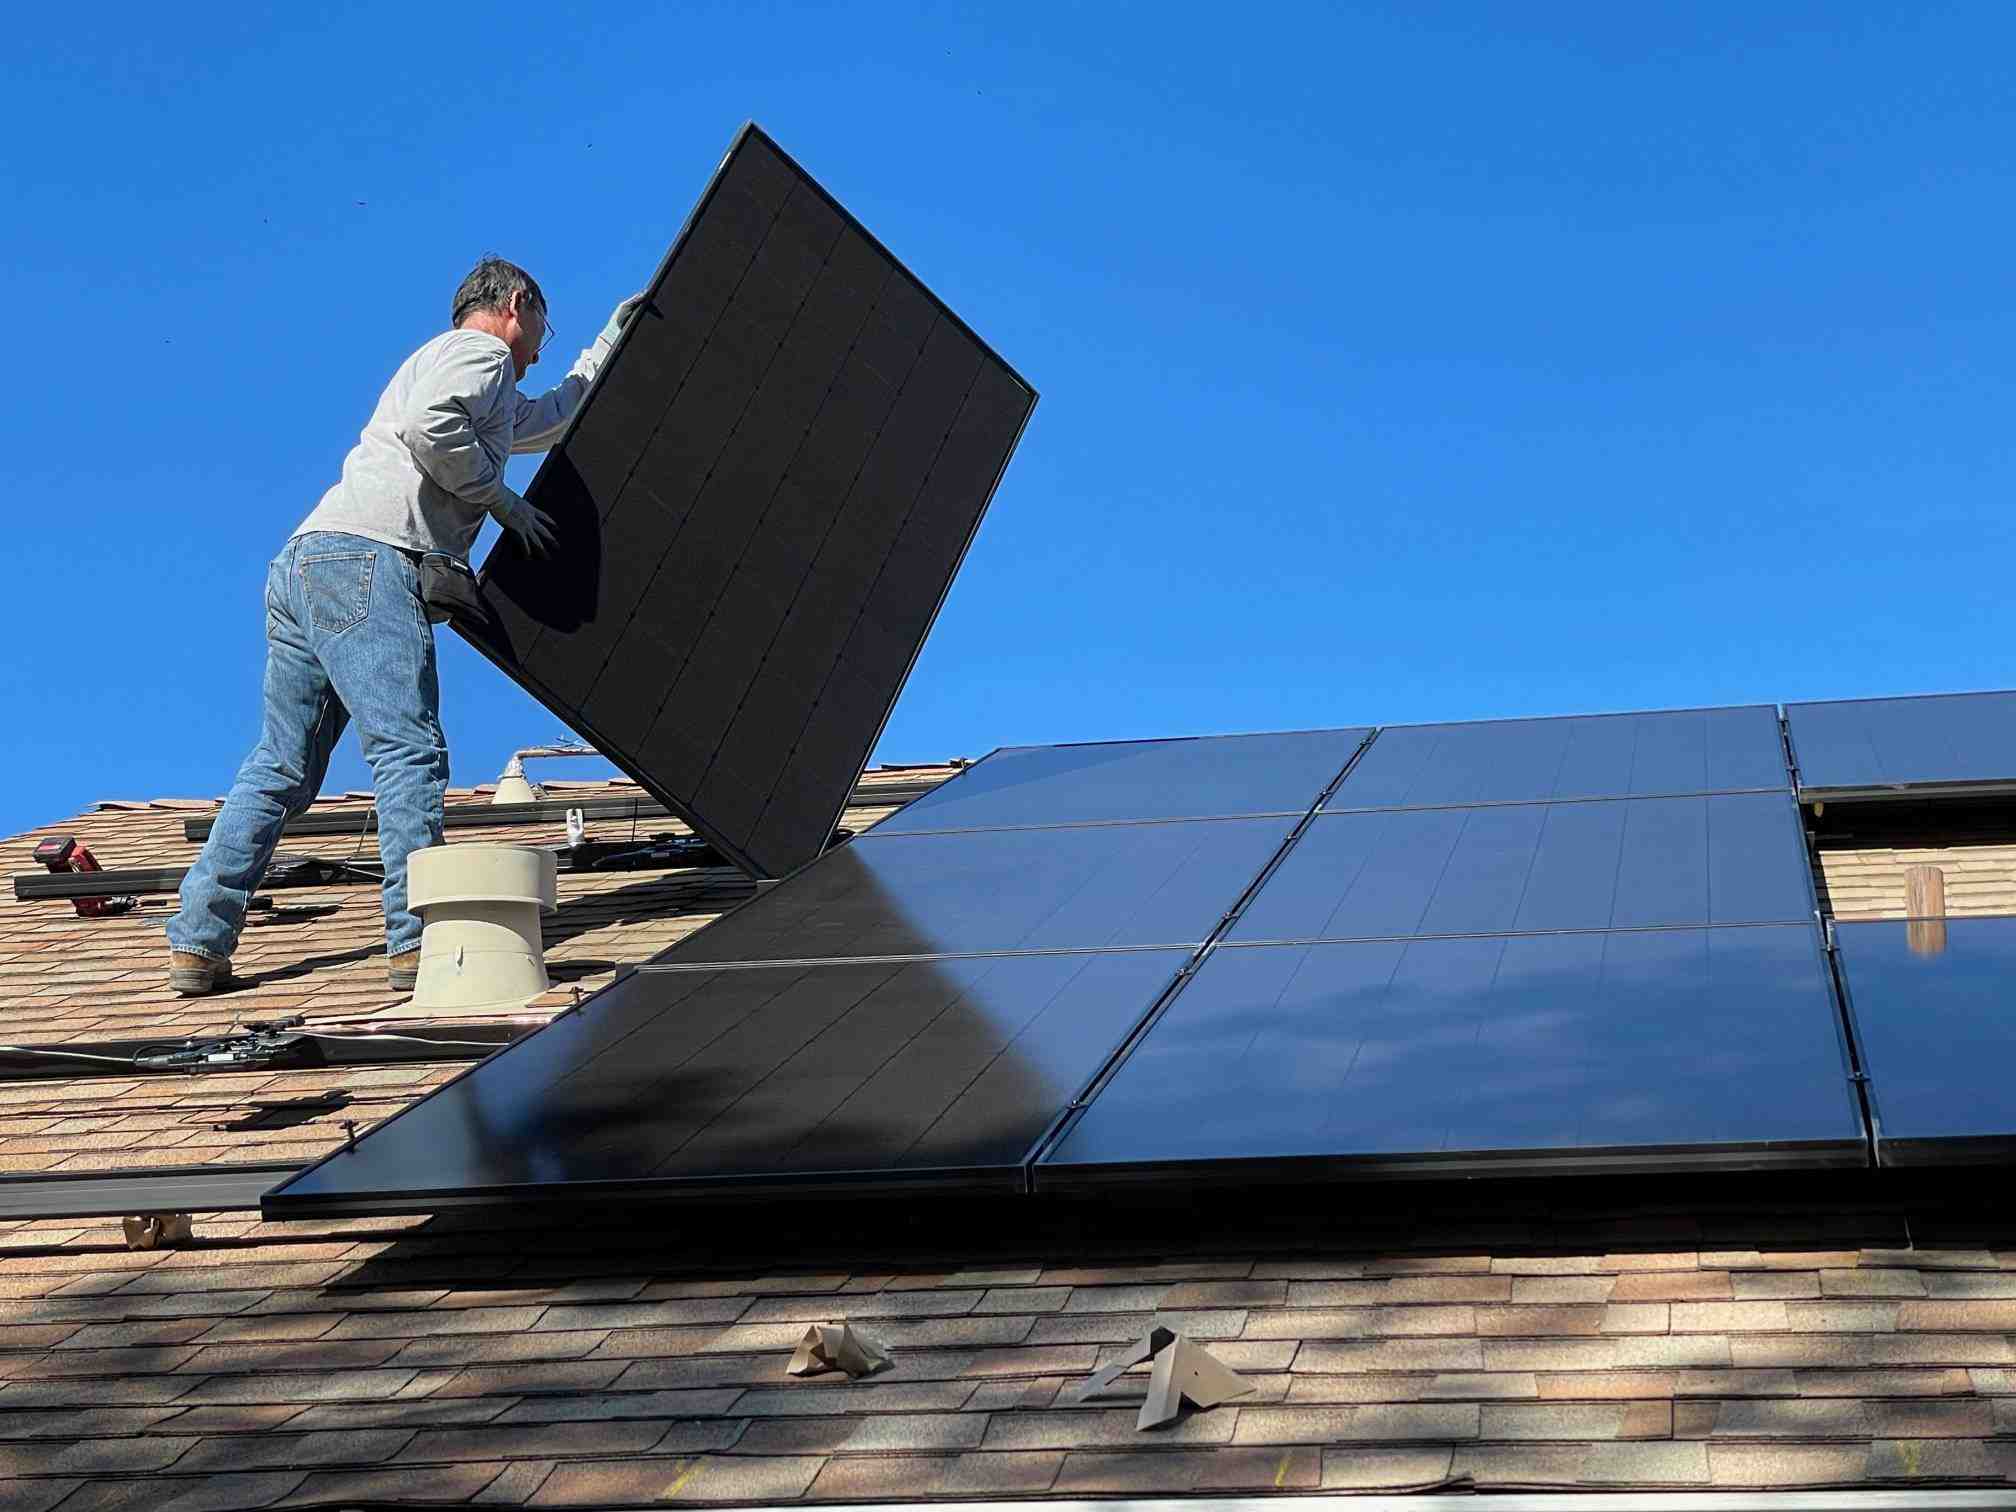 How hard is it to move solar panels?